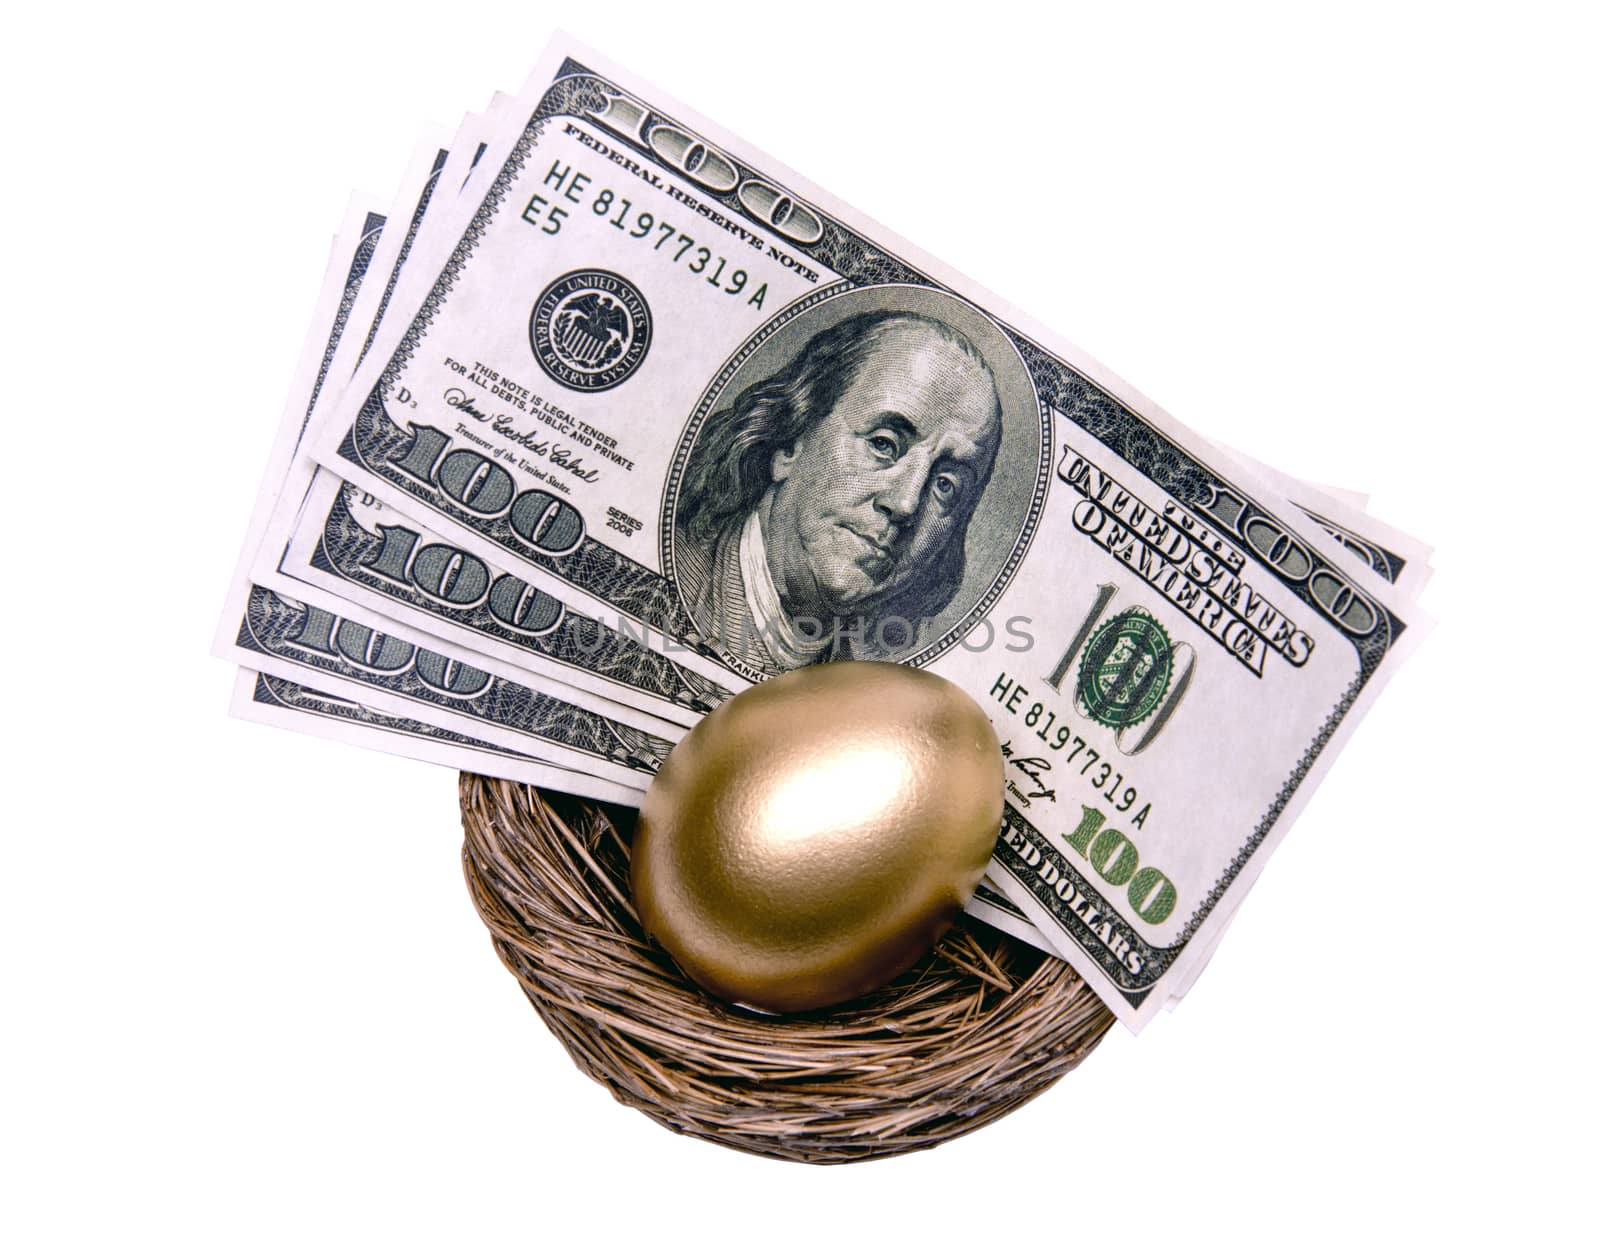 Golden Egg And Money Isolated On White by stockbuster1